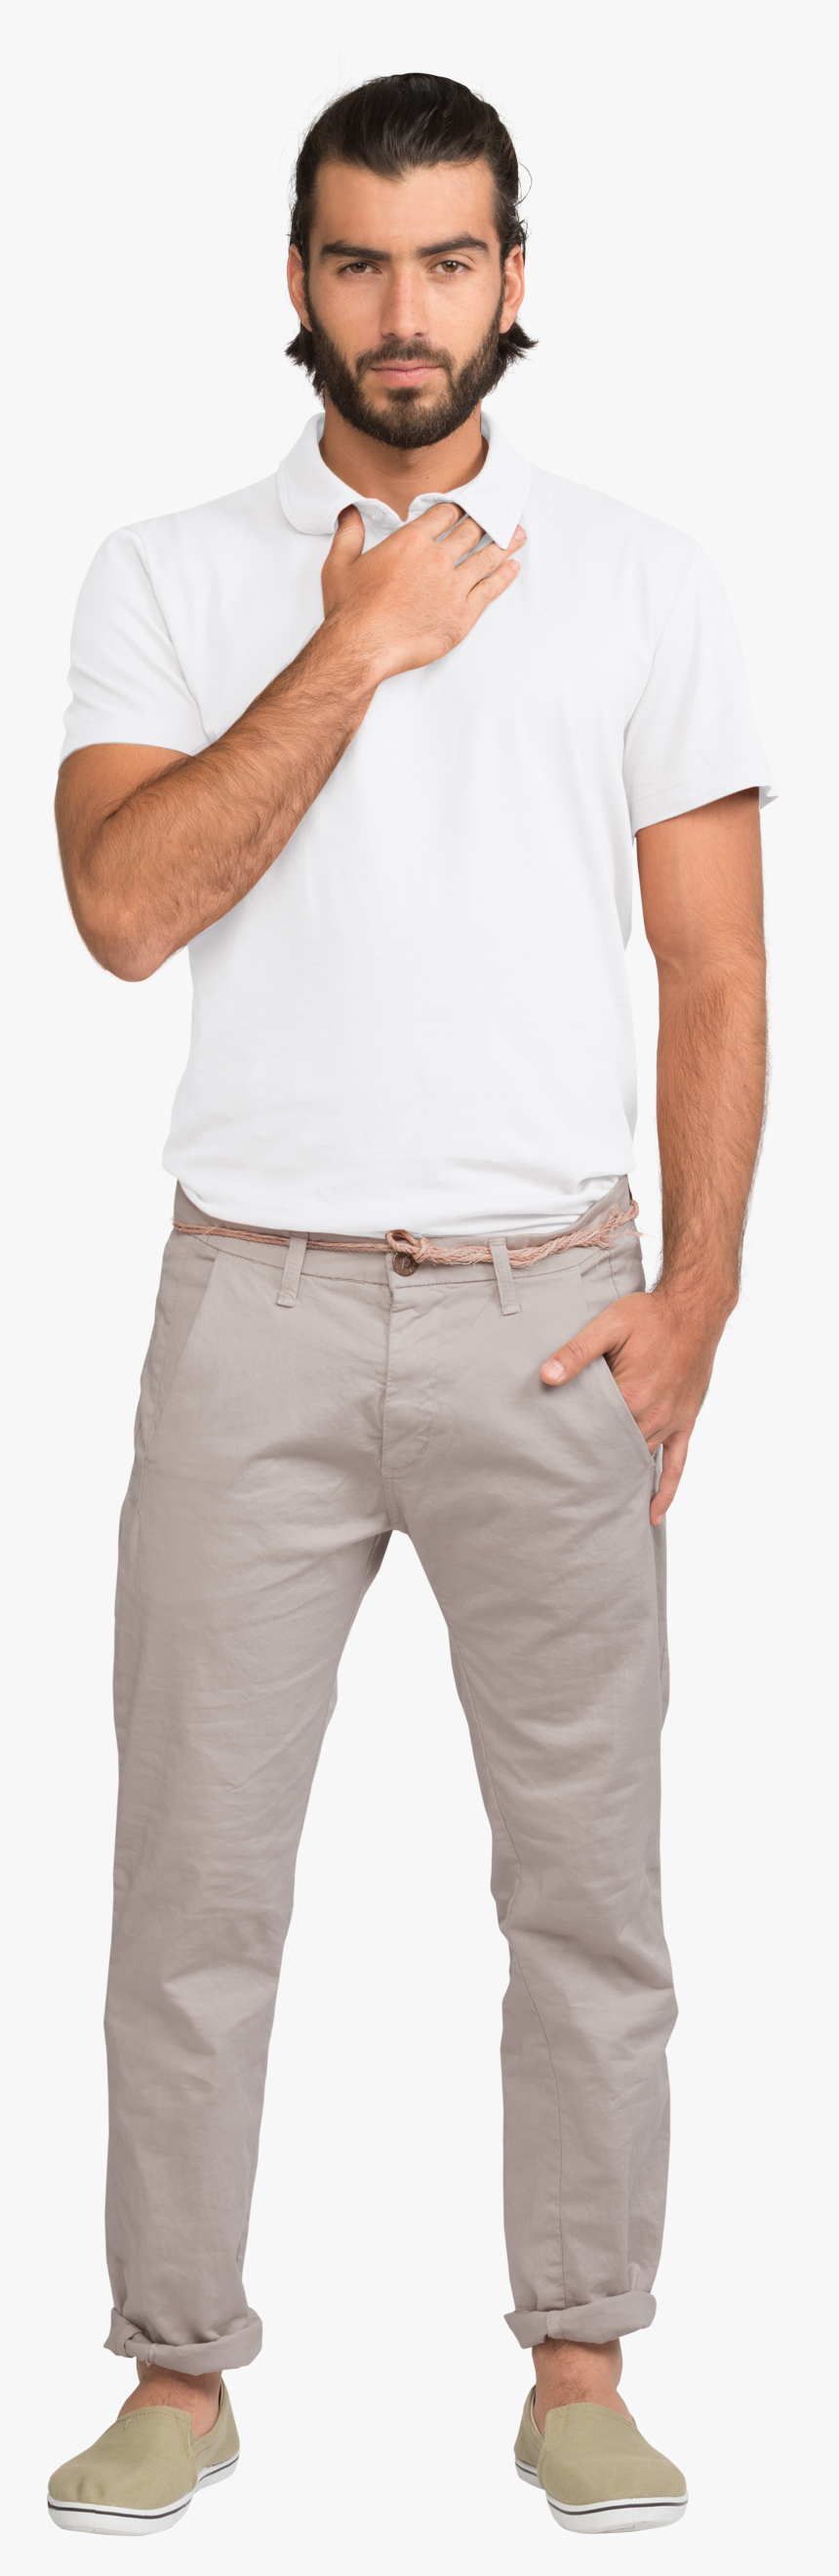 Man With T Shirt Png - Man In White Polo, Transparent Png, Free Download